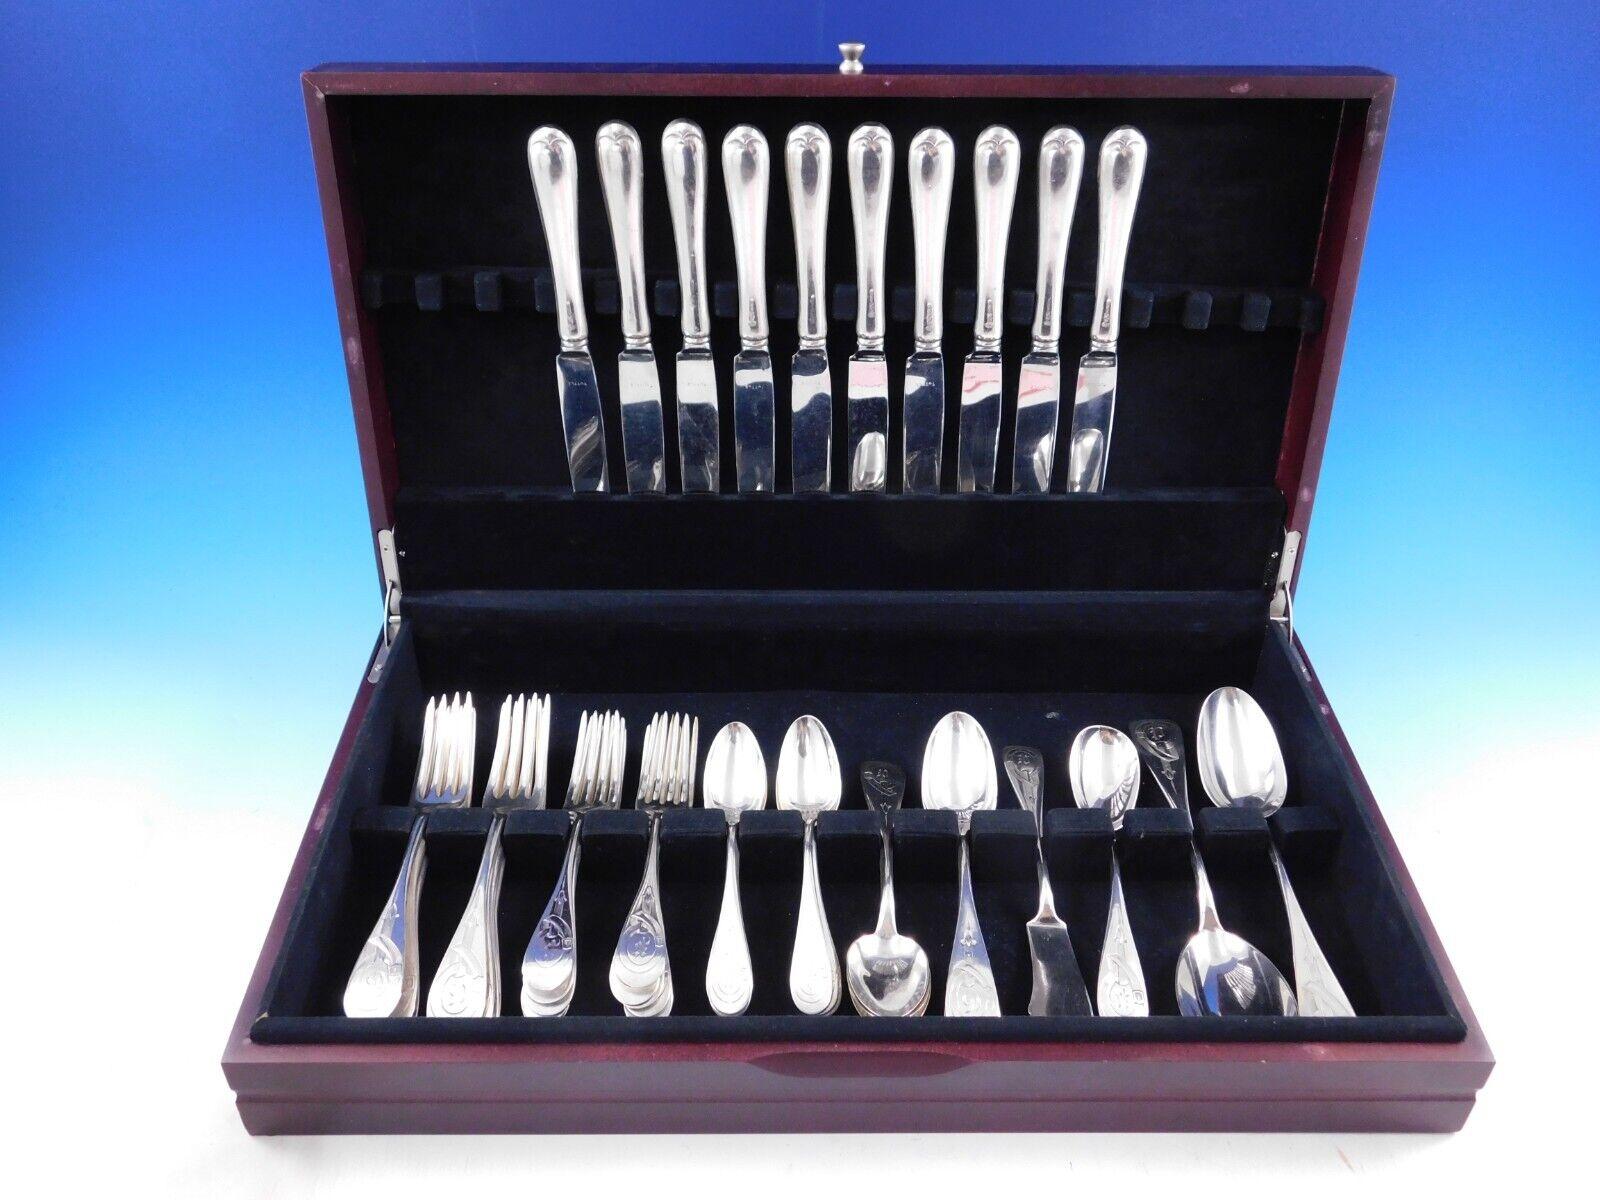 Extraordinary Dinner Size Watson sterling silver Flatware set featuring a hand engraved Horse Stirrup - 50 pieces total (including Hannah Hull Dinner Knives). This set includes:

10 Dinner Size Knives, 9 1/2